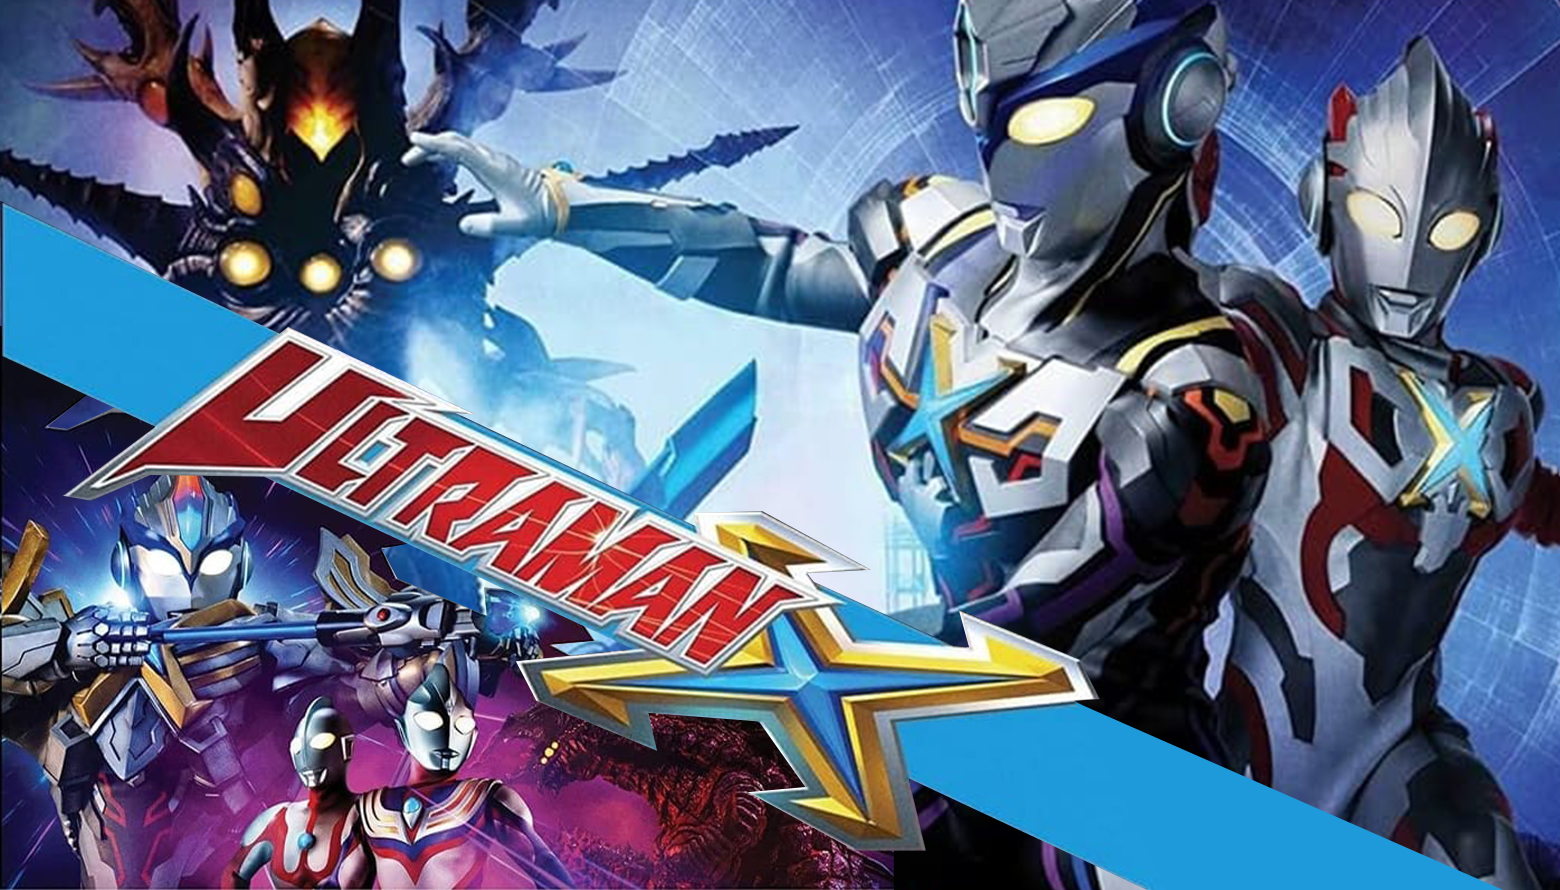 FIRE UP YOUR SPARK DOLL!  ULTRAMAN X:THE COMPLETE SERIES + MOVIE ARRIVES